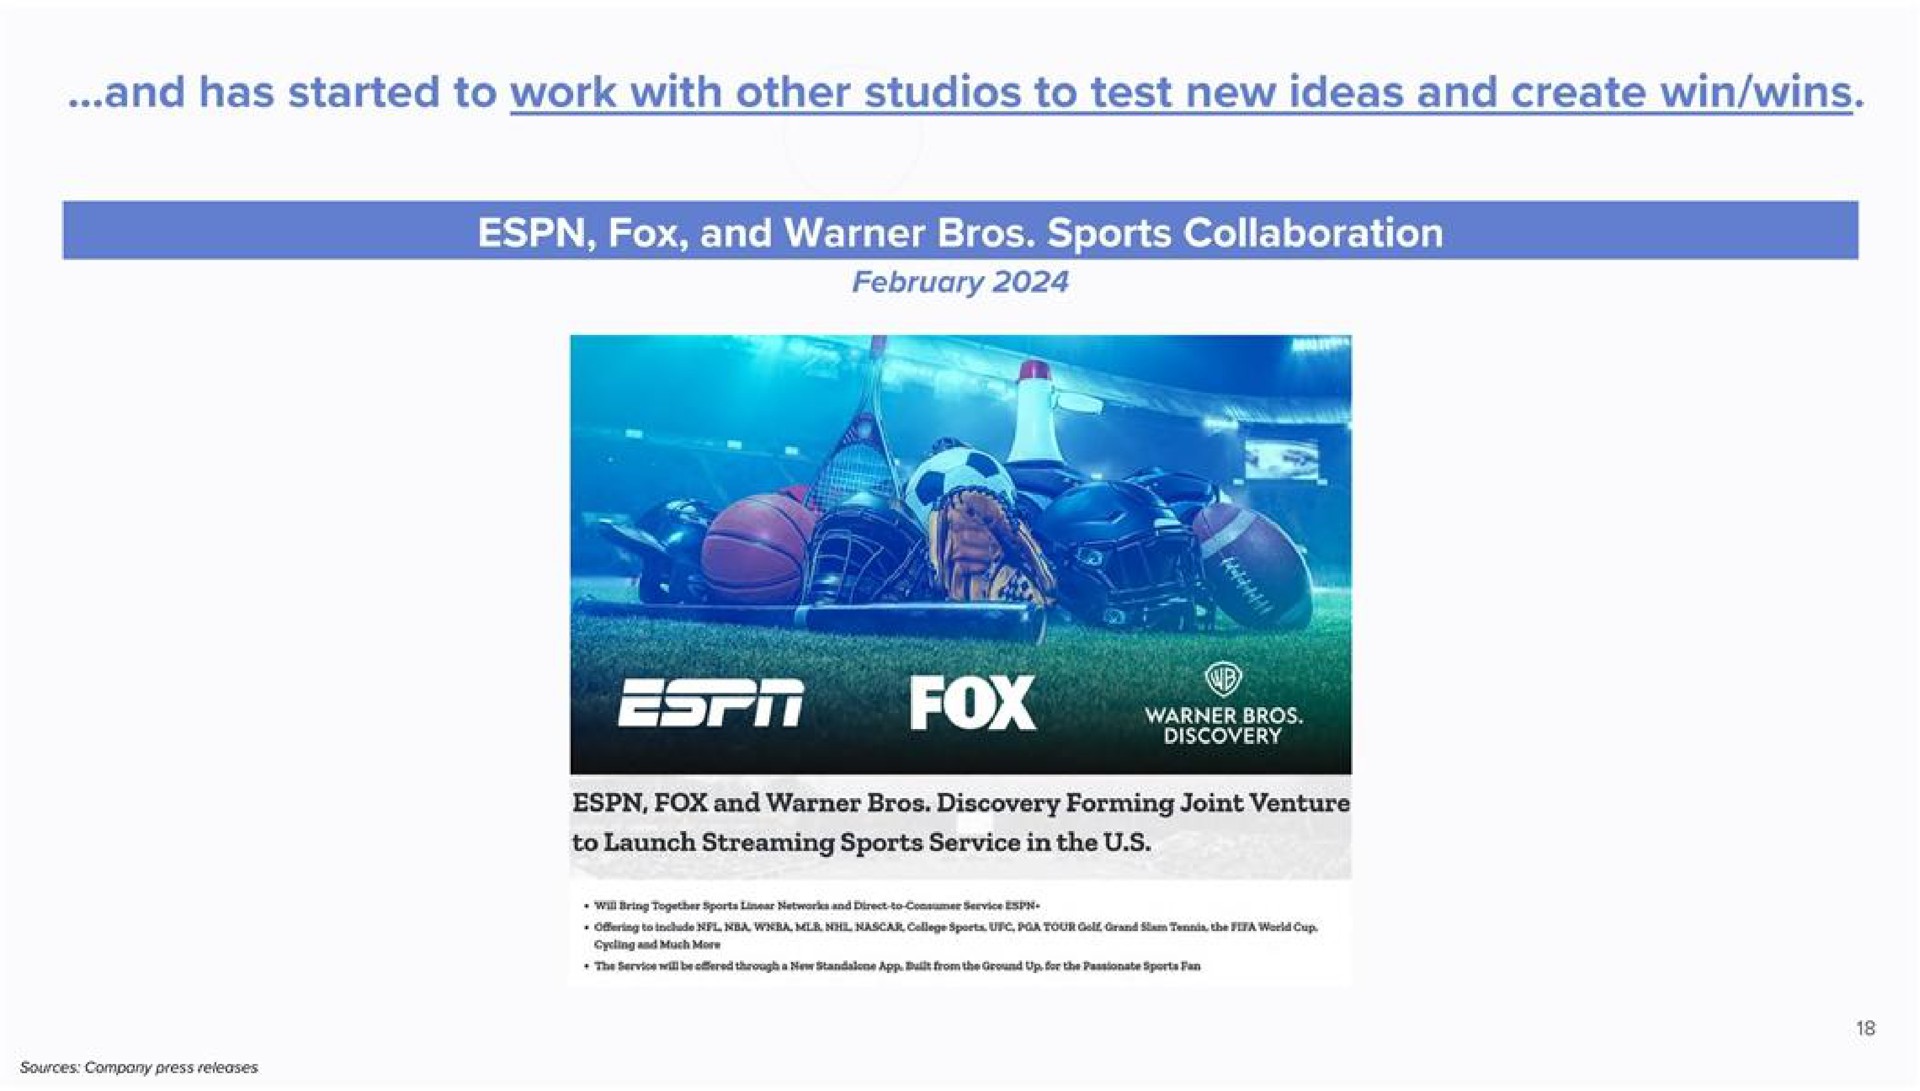 and has started to work with other studios to test new ideas and create win wins fox and wet sports | ValueAct Capital